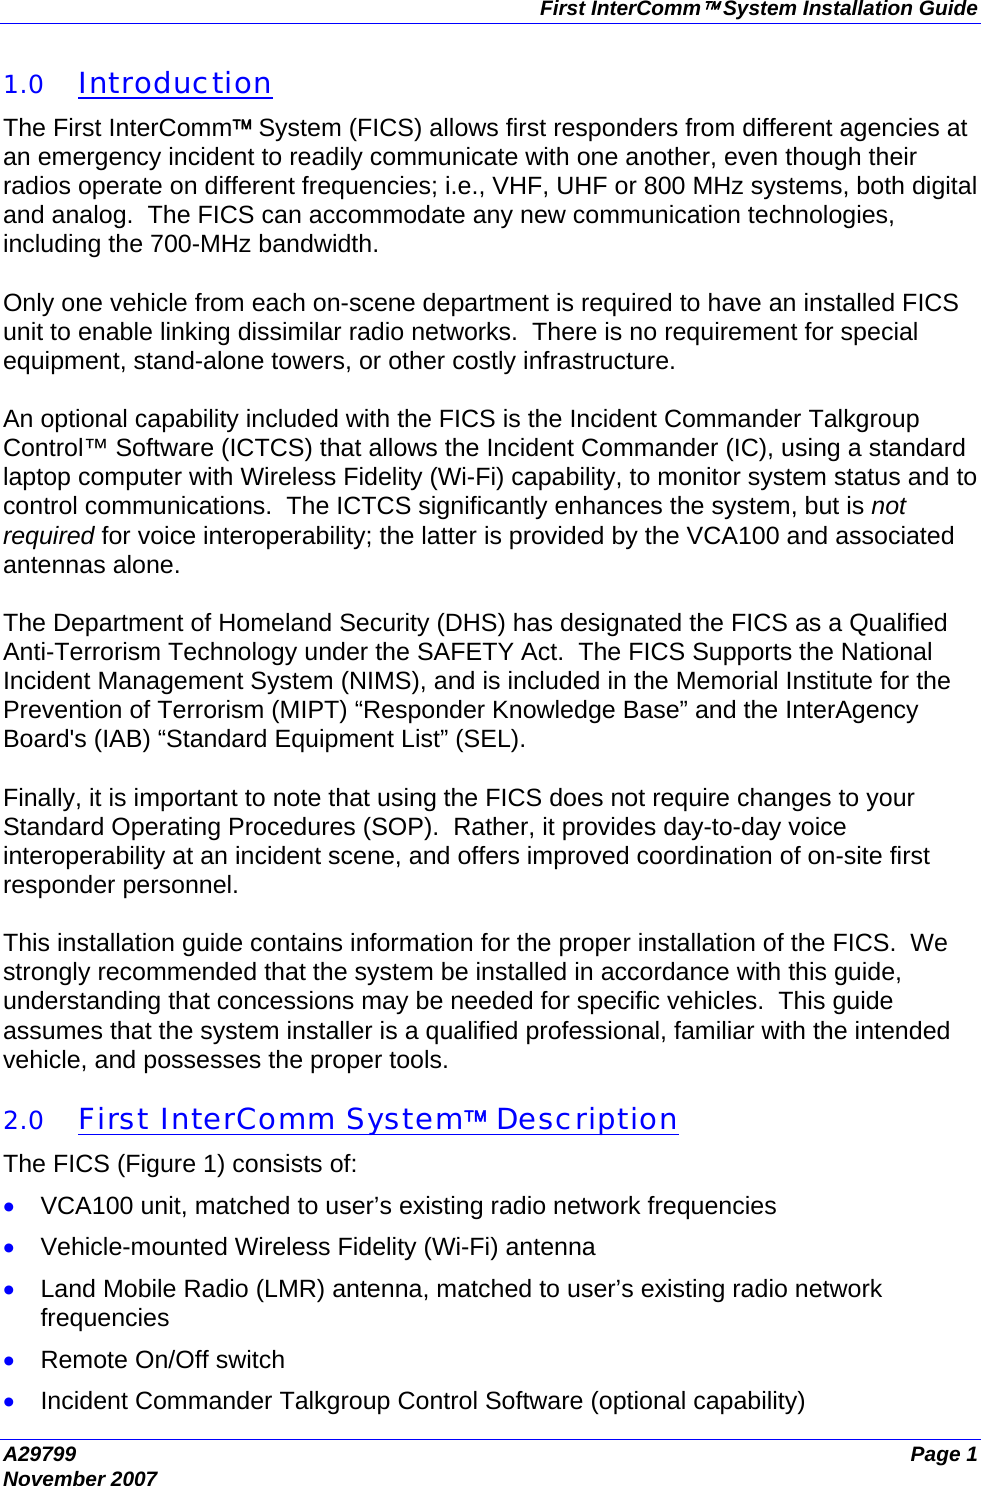 First InterComm™ System Installation Guide A29799  Page 1 November 2007  1.0 Introduction The First InterComm™ System (FICS) allows first responders from different agencies at an emergency incident to readily communicate with one another, even though their radios operate on different frequencies; i.e., VHF, UHF or 800 MHz systems, both digital and analog.  The FICS can accommodate any new communication technologies, including the 700-MHz bandwidth.  Only one vehicle from each on-scene department is required to have an installed FICS unit to enable linking dissimilar radio networks.  There is no requirement for special equipment, stand-alone towers, or other costly infrastructure.  An optional capability included with the FICS is the Incident Commander Talkgroup Control™ Software (ICTCS) that allows the Incident Commander (IC), using a standard laptop computer with Wireless Fidelity (Wi-Fi) capability, to monitor system status and to control communications.  The ICTCS significantly enhances the system, but is not required for voice interoperability; the latter is provided by the VCA100 and associated antennas alone.  The Department of Homeland Security (DHS) has designated the FICS as a Qualified Anti-Terrorism Technology under the SAFETY Act.  The FICS Supports the National Incident Management System (NIMS), and is included in the Memorial Institute for the Prevention of Terrorism (MIPT) “Responder Knowledge Base” and the InterAgency Board&apos;s (IAB) “Standard Equipment List” (SEL).  Finally, it is important to note that using the FICS does not require changes to your Standard Operating Procedures (SOP).  Rather, it provides day-to-day voice interoperability at an incident scene, and offers improved coordination of on-site first responder personnel.  This installation guide contains information for the proper installation of the FICS.  We strongly recommended that the system be installed in accordance with this guide, understanding that concessions may be needed for specific vehicles.  This guide assumes that the system installer is a qualified professional, familiar with the intended vehicle, and possesses the proper tools.  2.0 First InterComm System™ Description The FICS (Figure 1) consists of: • VCA100 unit, matched to user’s existing radio network frequencies • Vehicle-mounted Wireless Fidelity (Wi-Fi) antenna • Land Mobile Radio (LMR) antenna, matched to user’s existing radio network frequencies • Remote On/Off switch • Incident Commander Talkgroup Control Software (optional capability) 